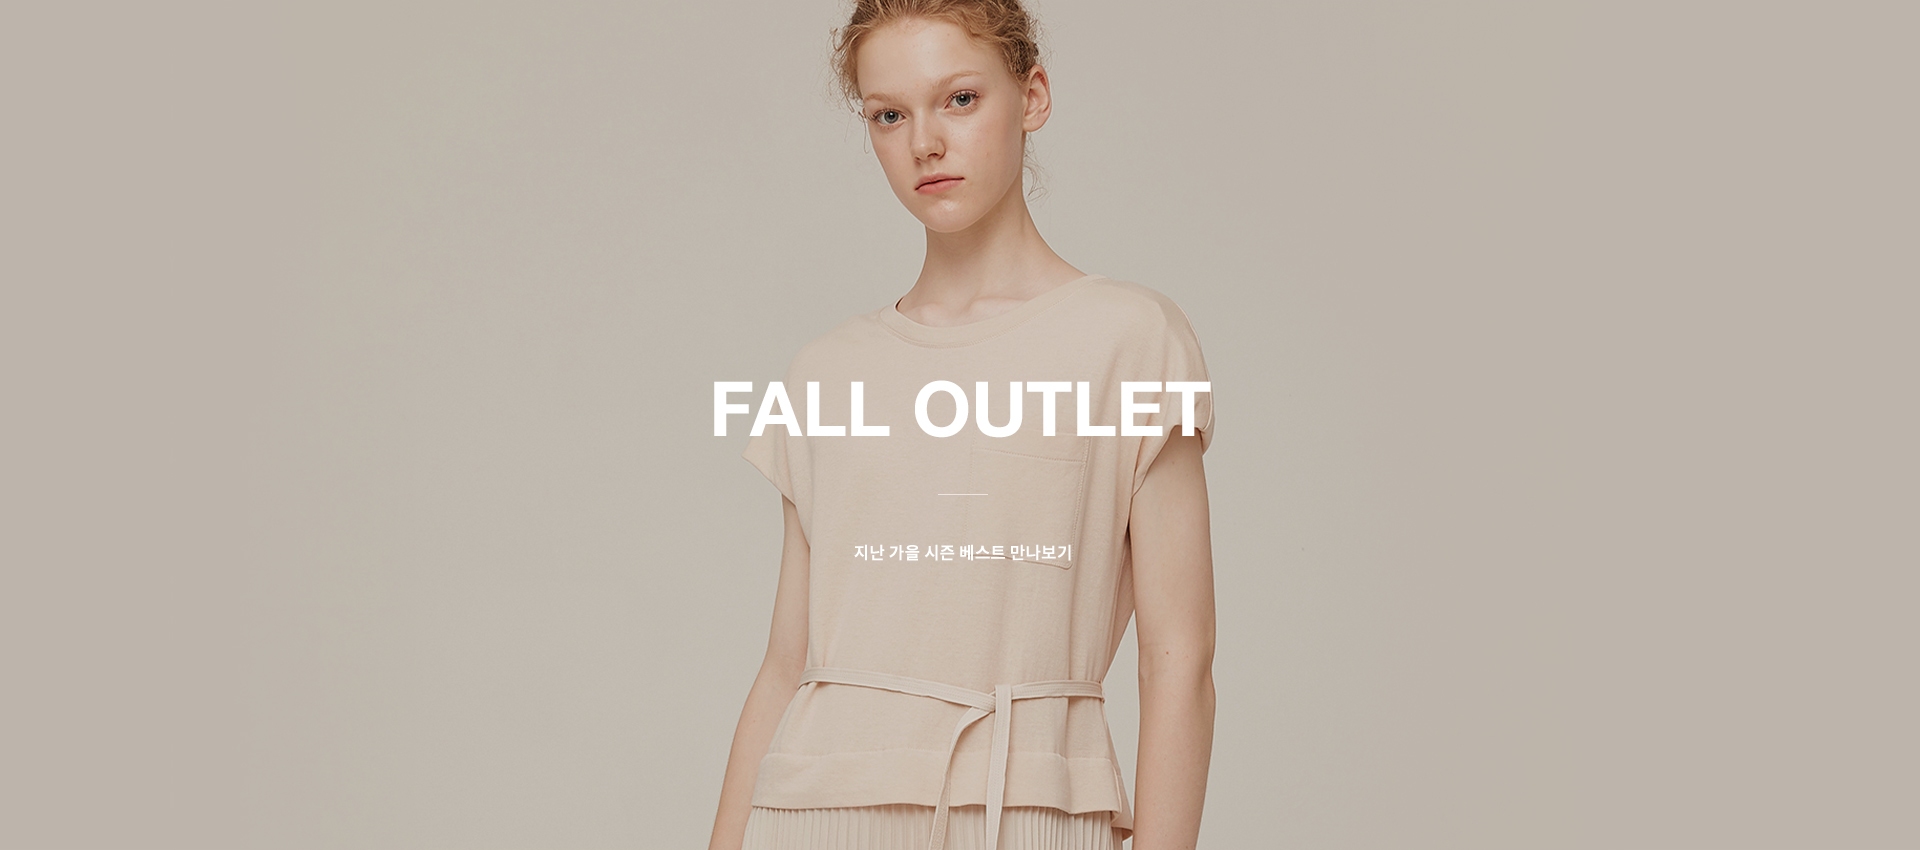 0_FALL OUTLET